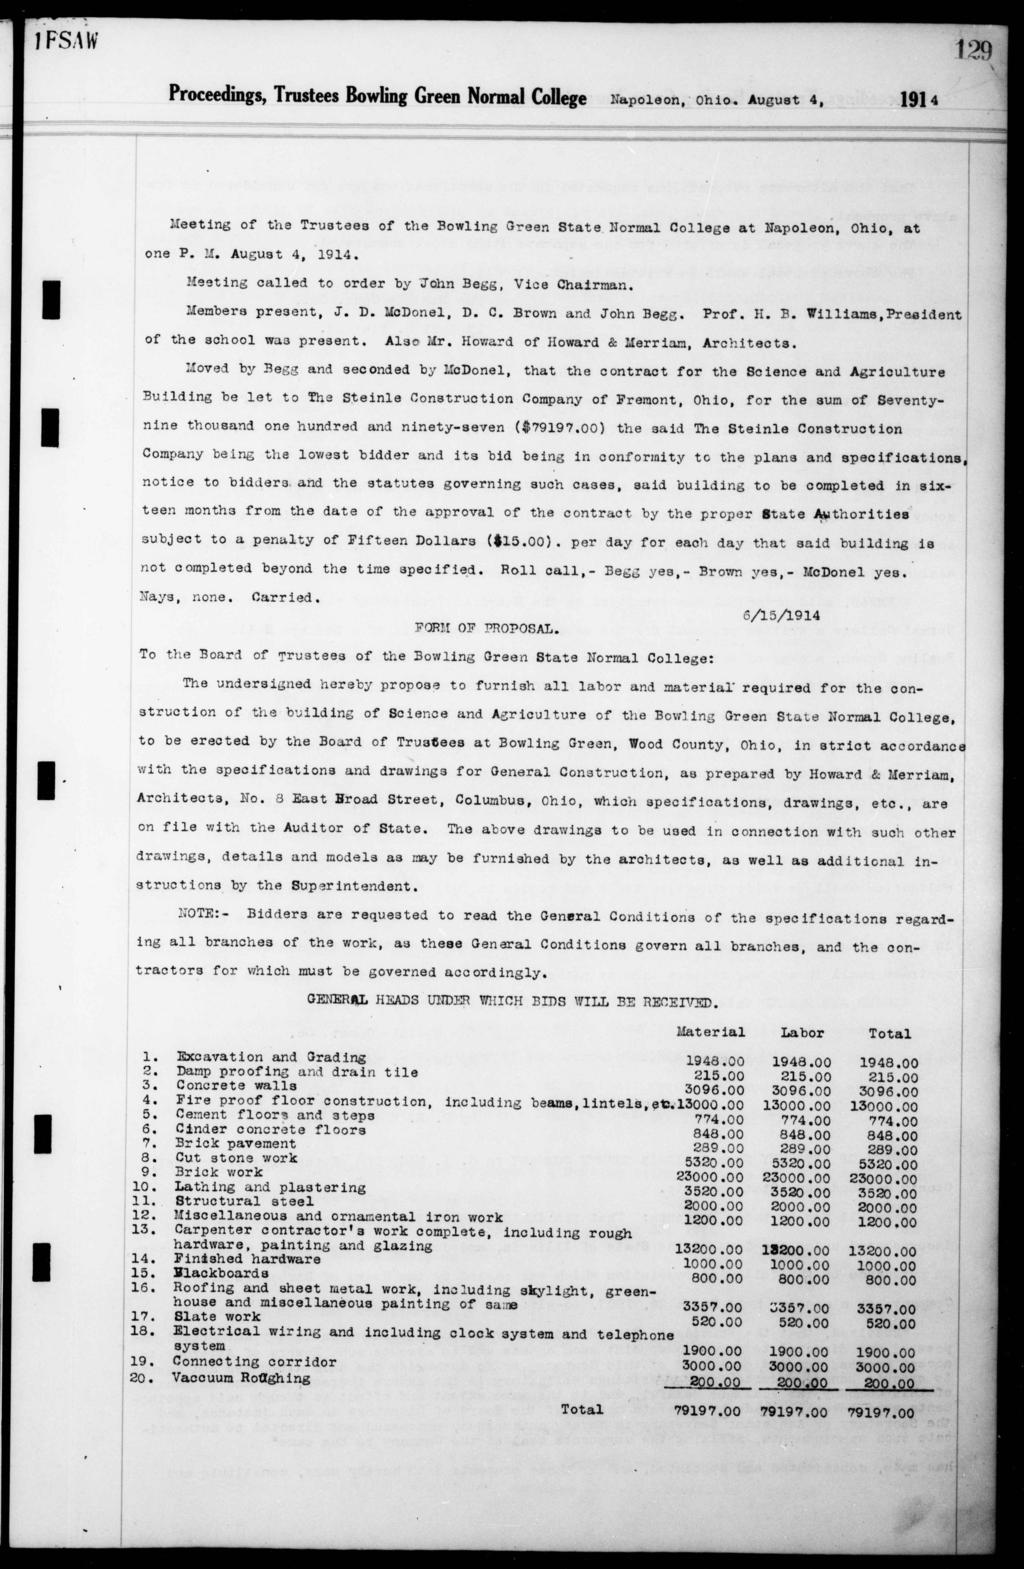 1FSAV 129 Proceedngs, Trustees Bowlng Green Normal College Napoleon, Oho. August 4, 1914 Meetng of the Trustees of the Bowlng Green State Normal College at Napoleon, Oho, at one P. f. August 4, 1914. Meetng called to order by 'John Begg, Vce Charman.